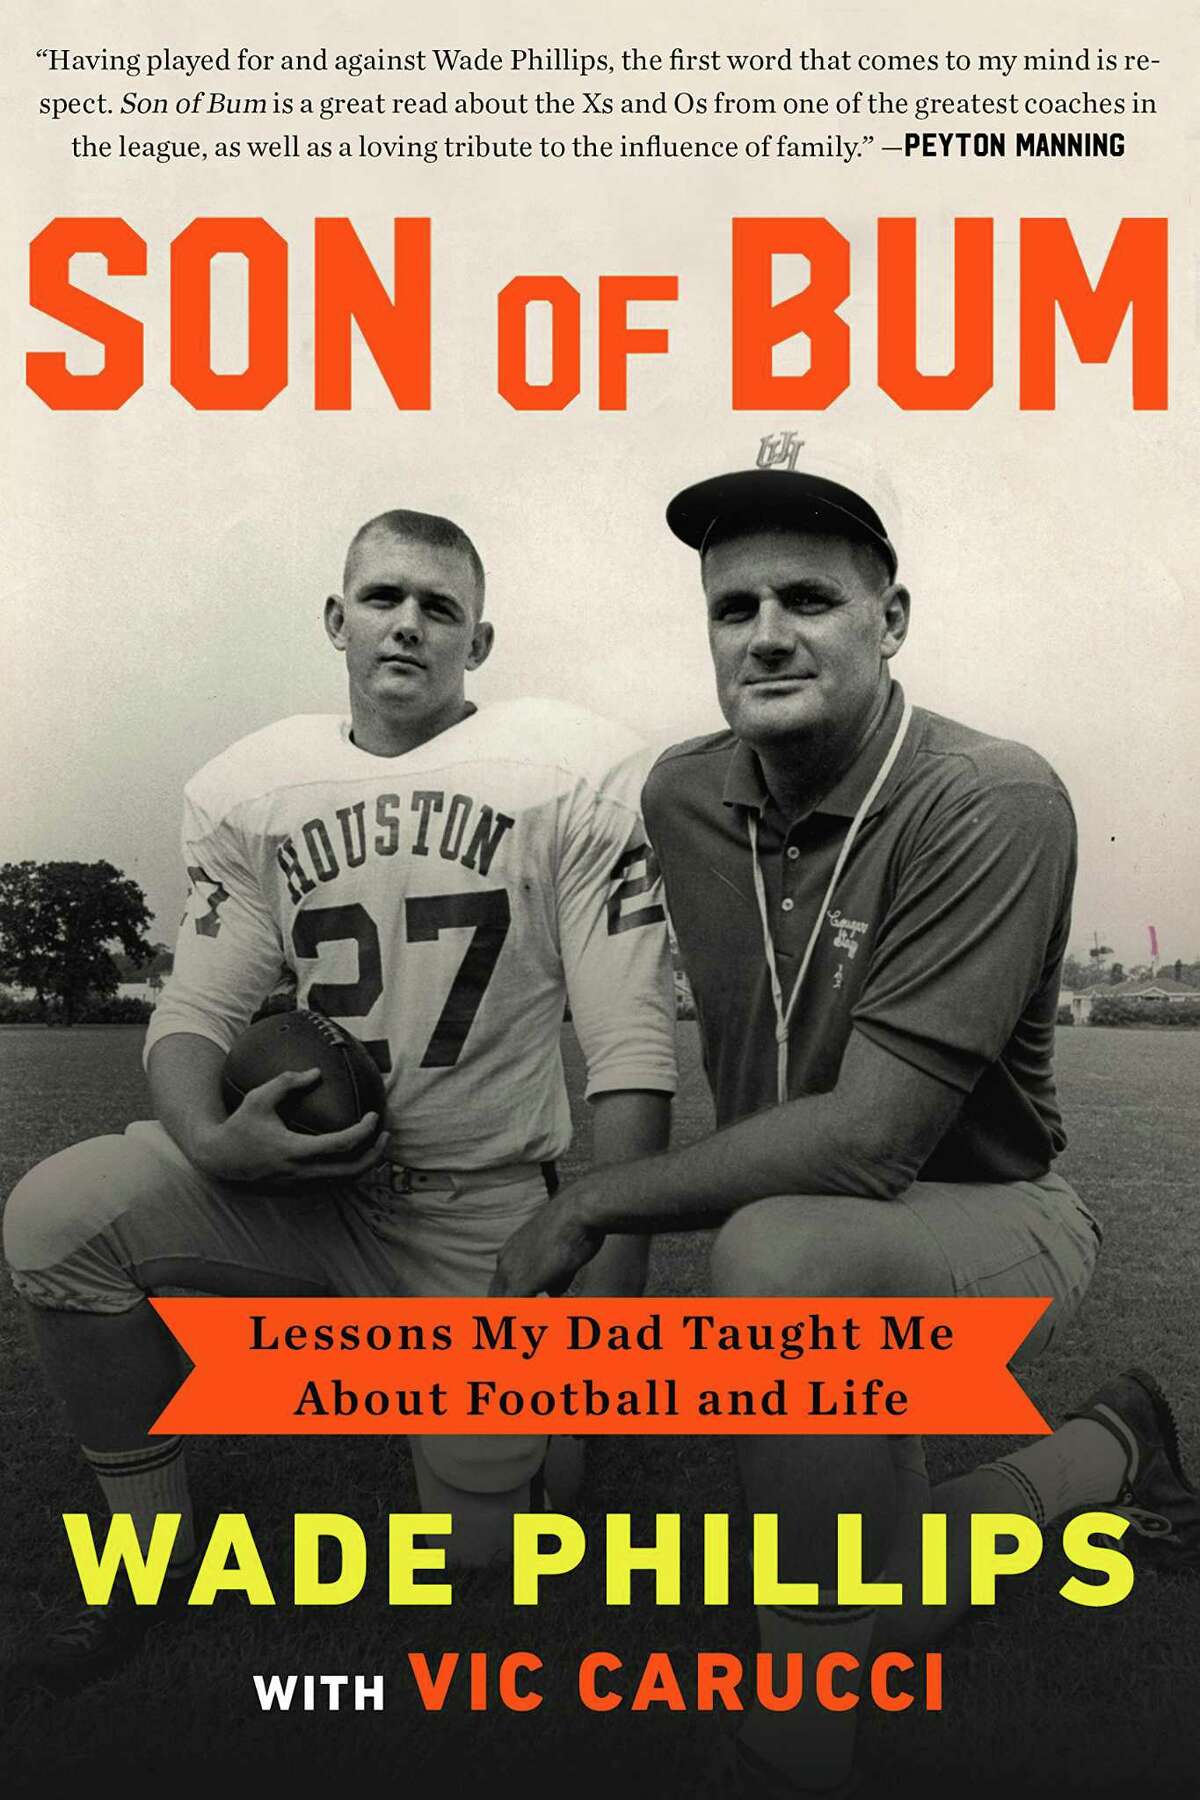 "Son of Bum: Lessons My Dad Taught Me About Football and Life," by Wade Phillips, with Vic Carucci, is scheduled for release on May 2. The Southeast Texas native will be in the area for two book signings as part of a tour to promote the book. (Diversion Publishing)